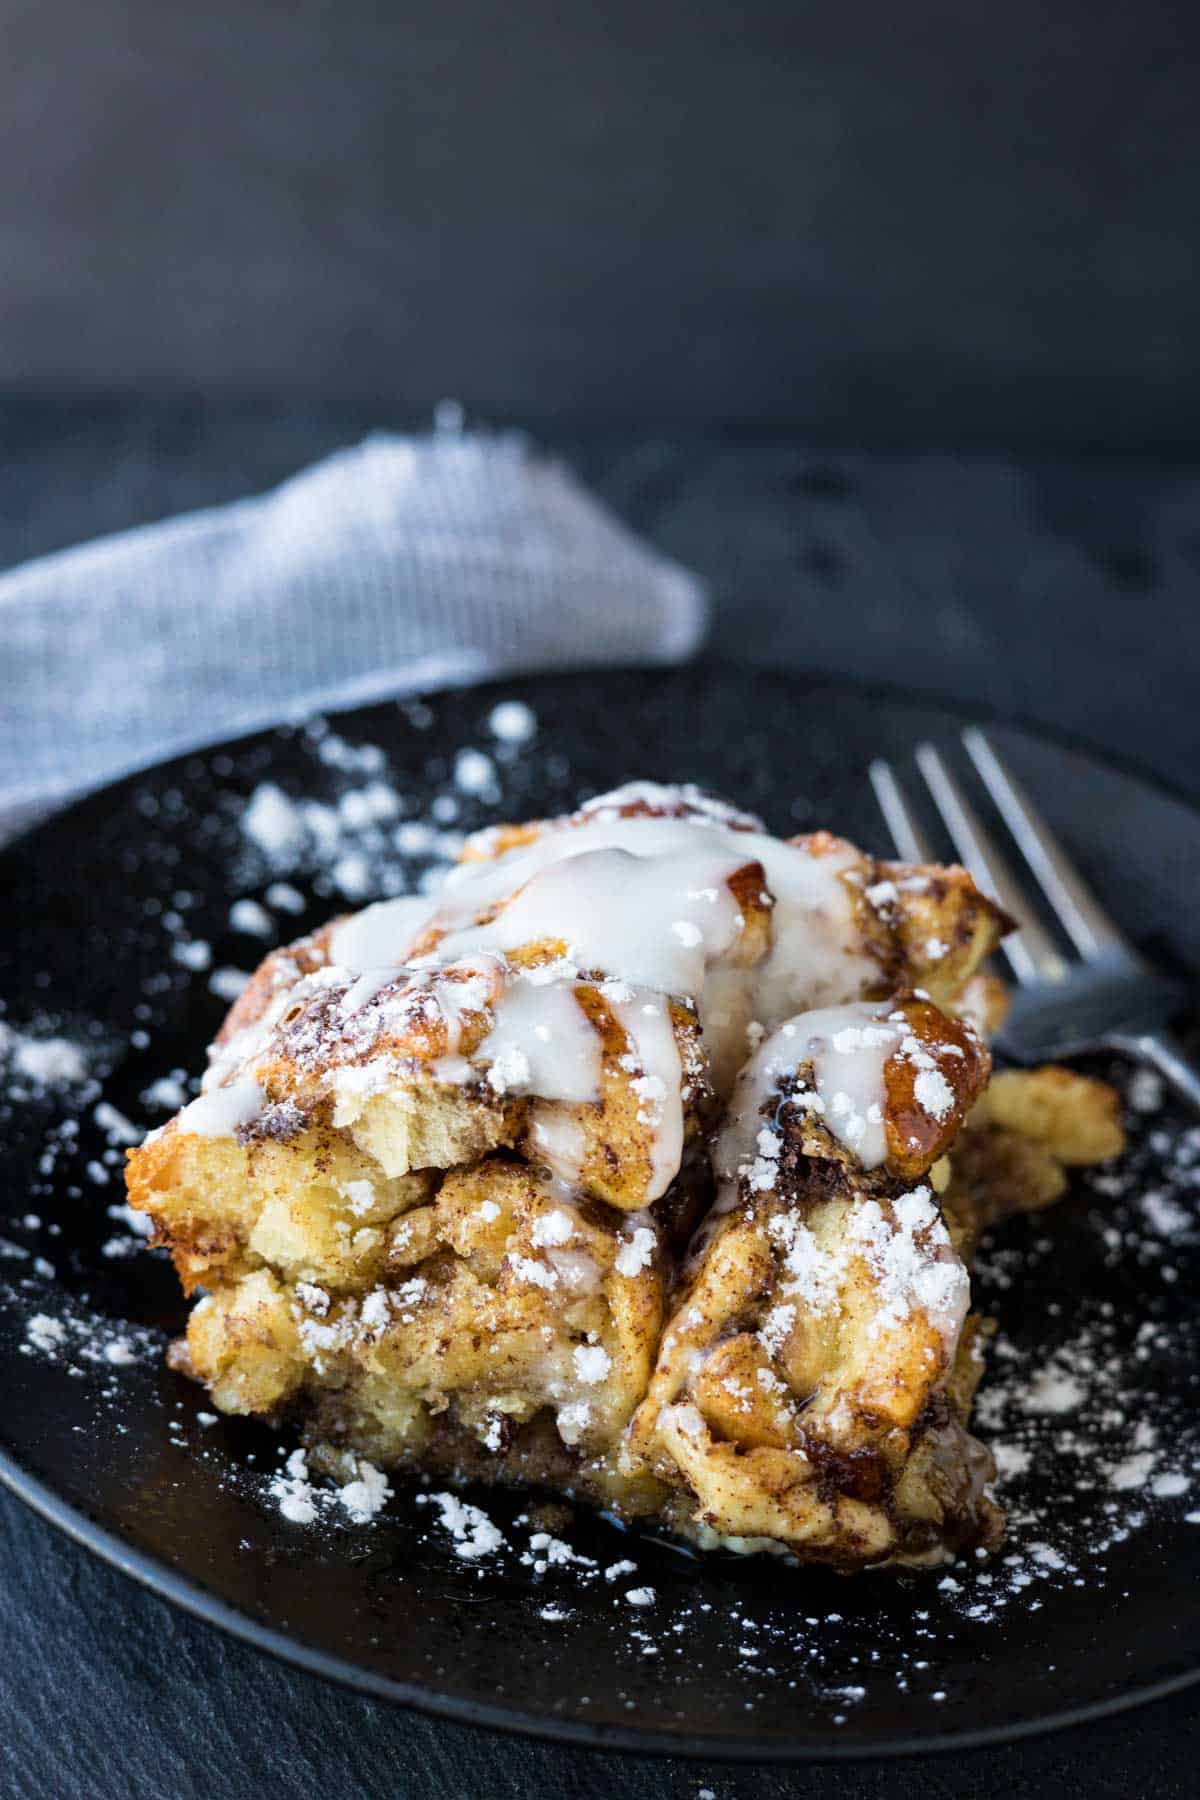 Cinnamon roll casserole with cream cheese frosting.